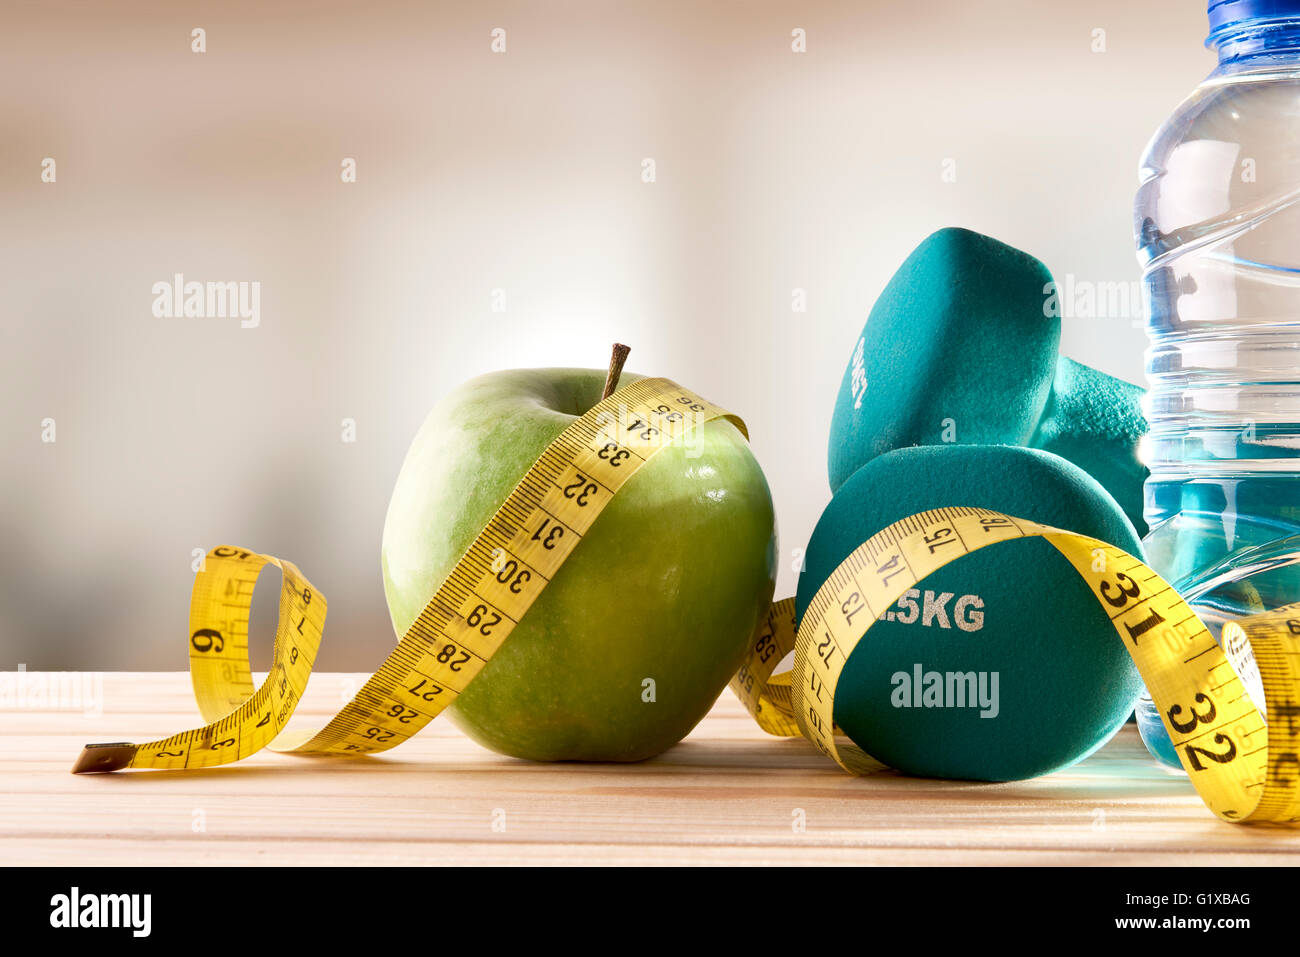 https://c8.alamy.com/comp/G1XBAG/dumbbells-with-apple-mineral-water-bottle-and-tape-measure-on-wood-G1XBAG.jpg